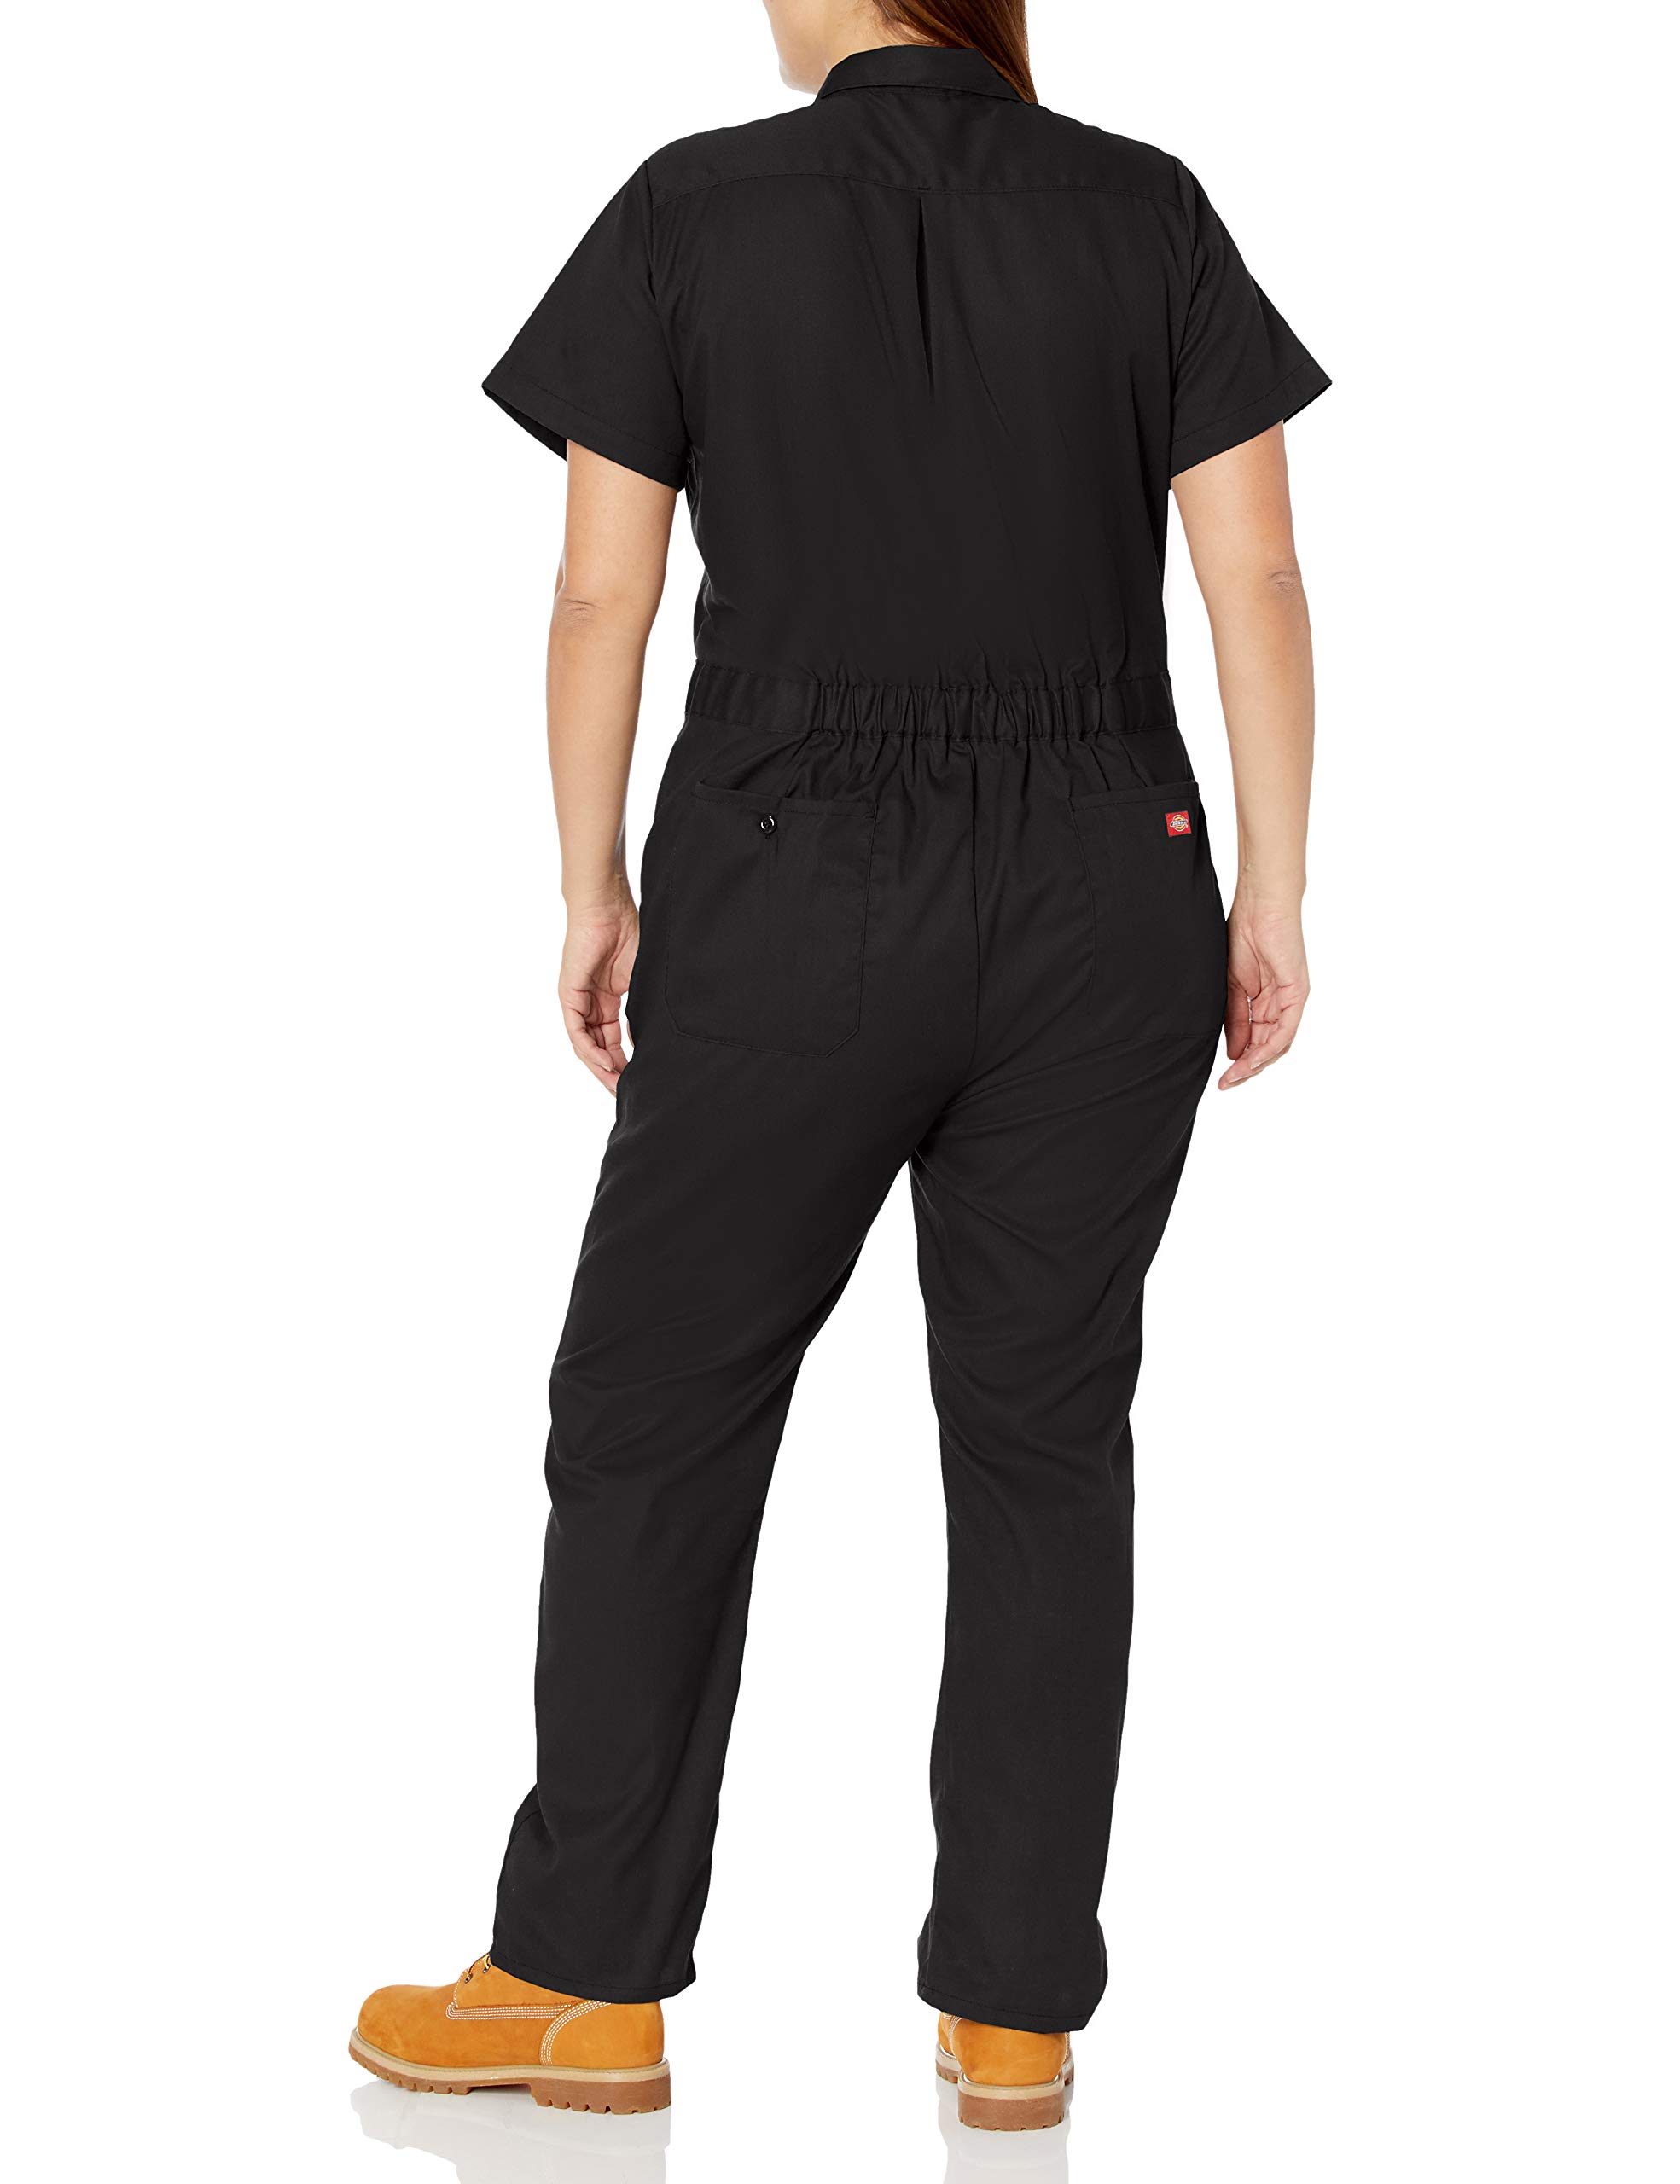 Dickies Women's Plus Size Flex Short Sleeve Coverall, Black, 1PS